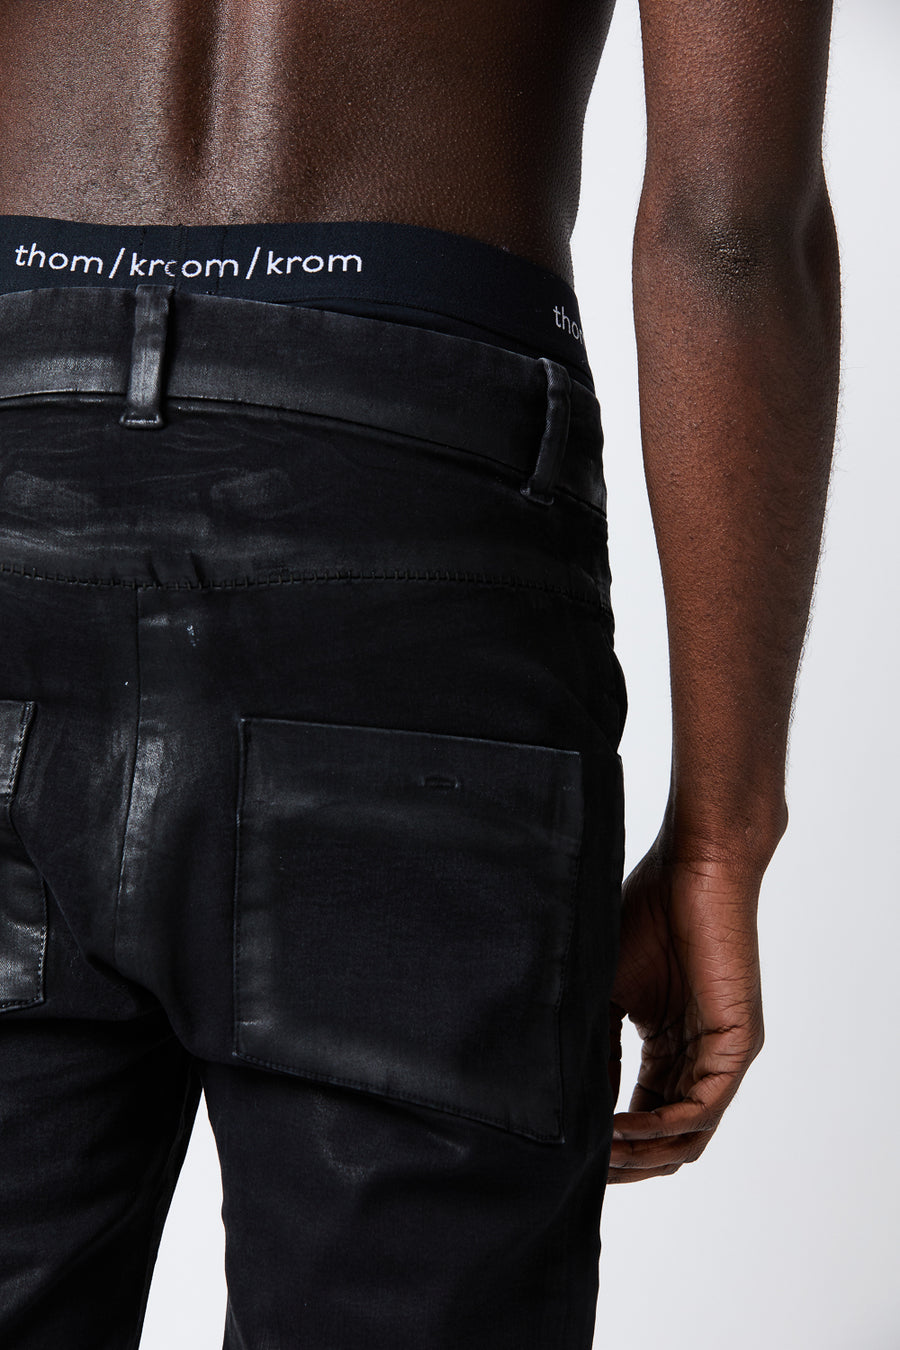 Buy the Thom Krom M T 75 Jeans Black Coated at Intro. Spend £50 for free UK delivery. Official stockists. We ship worldwide.